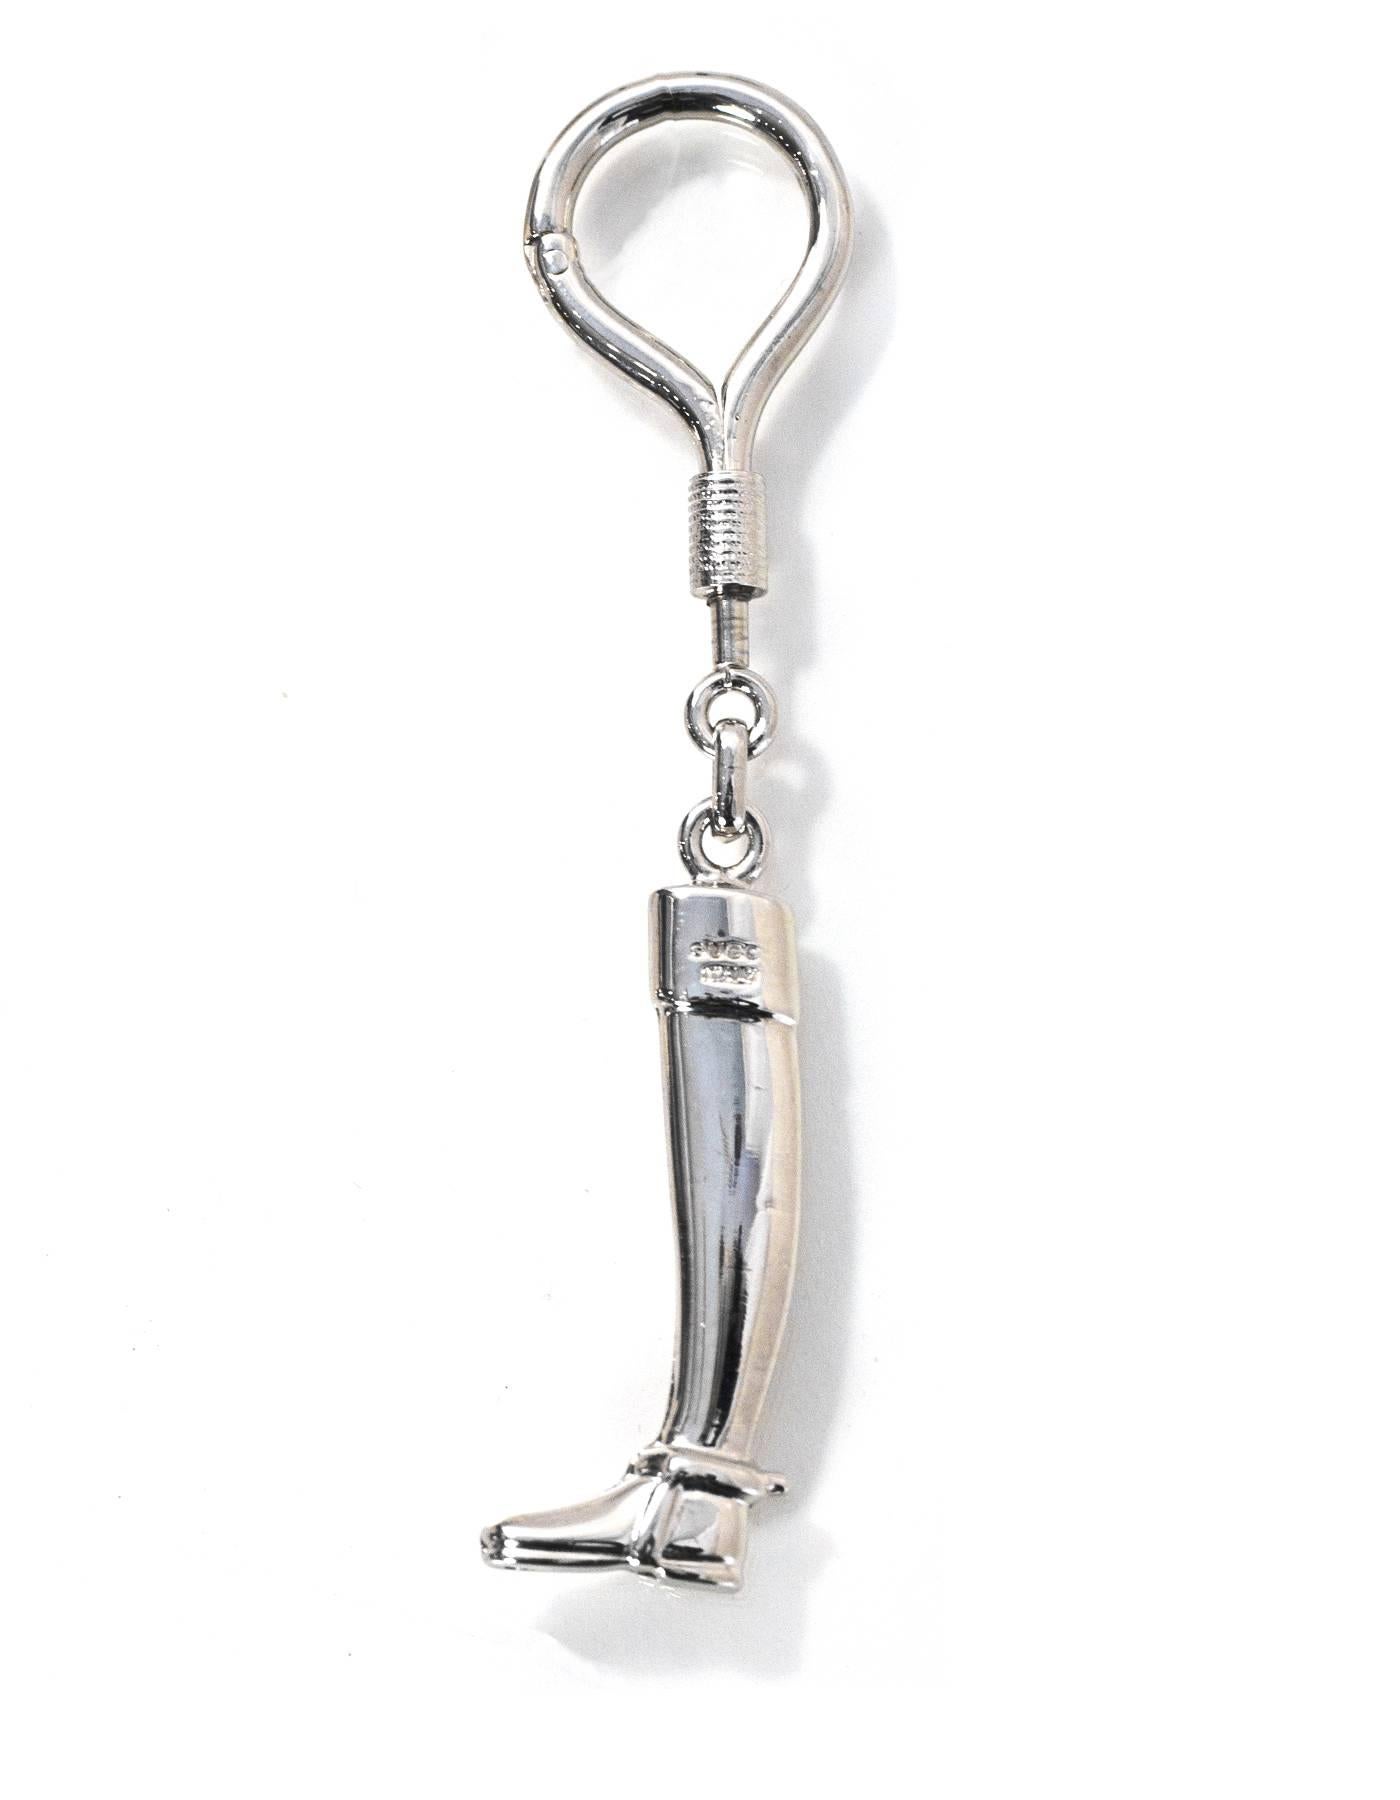 Gucci Silvertone Boot Keychain

Made In: Italy
Color: Silver
Materials: Metal
Closure: Push tap
Stamp: Gucci Italy
Overall Condition: Excellent pre-owned condition, light surface marks
Included: Gucci box

Measurements: 
Length: 4.5"